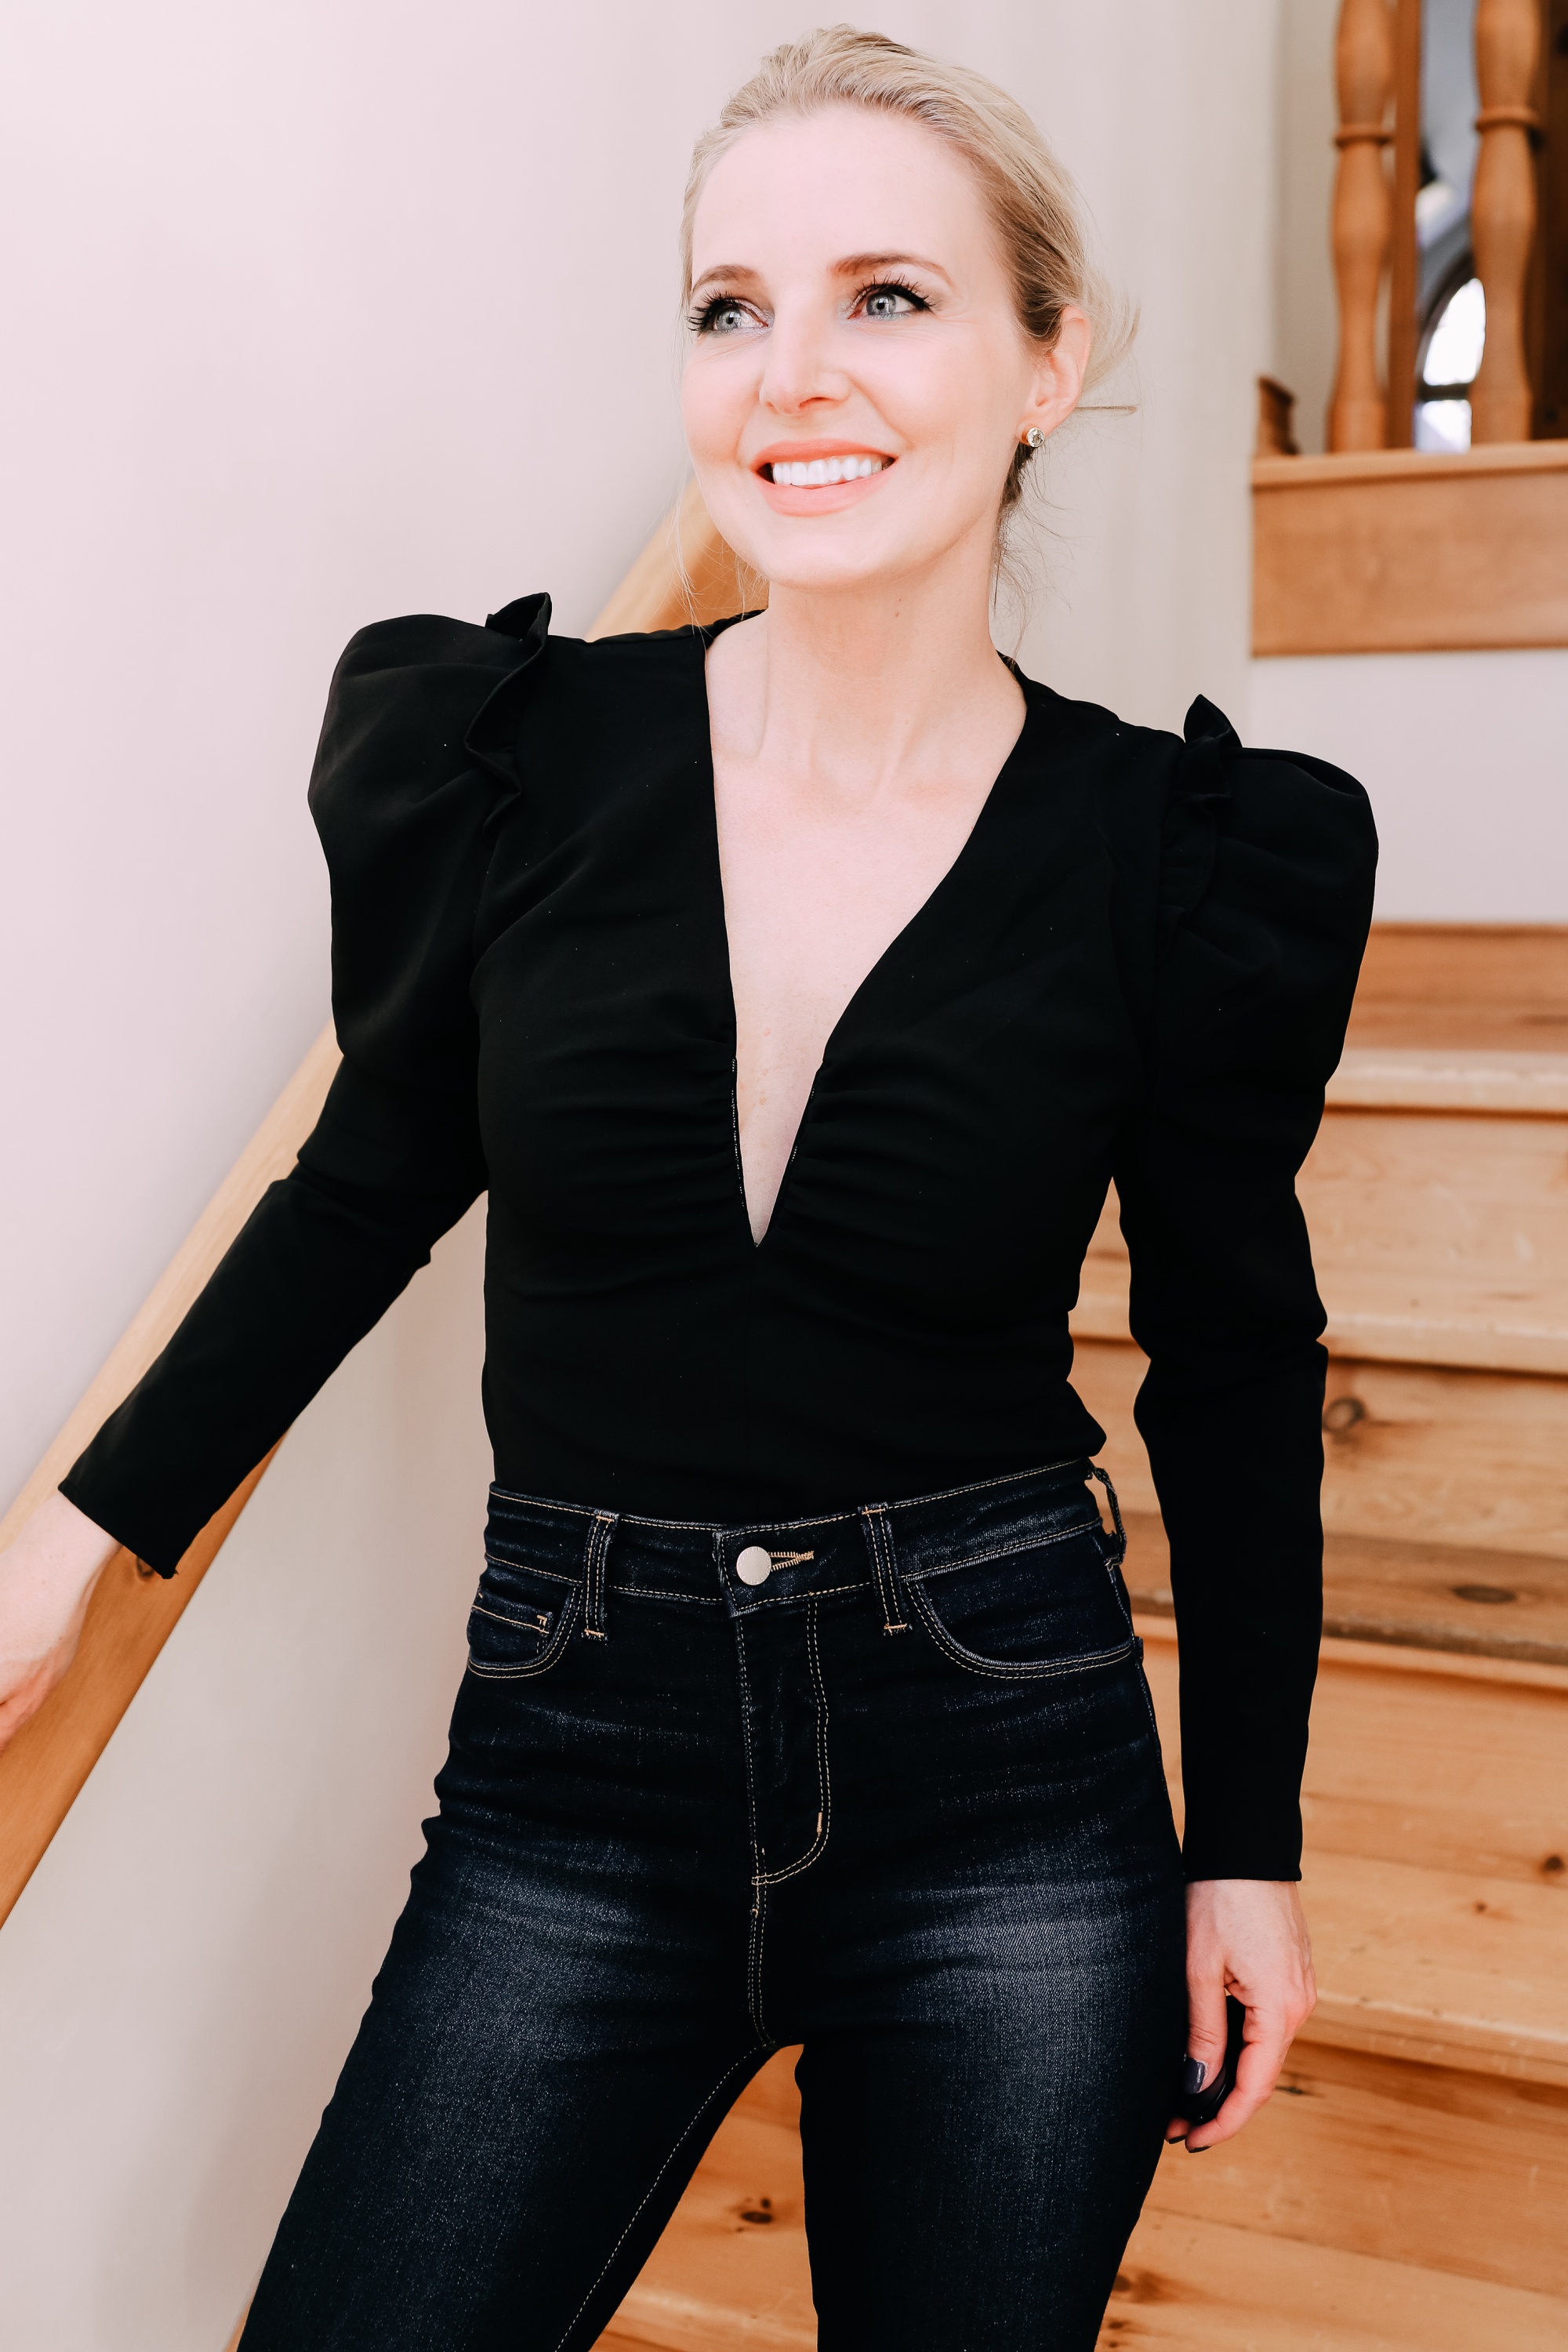 whiter teeth on fashion over 40 blogger Erin Busbee